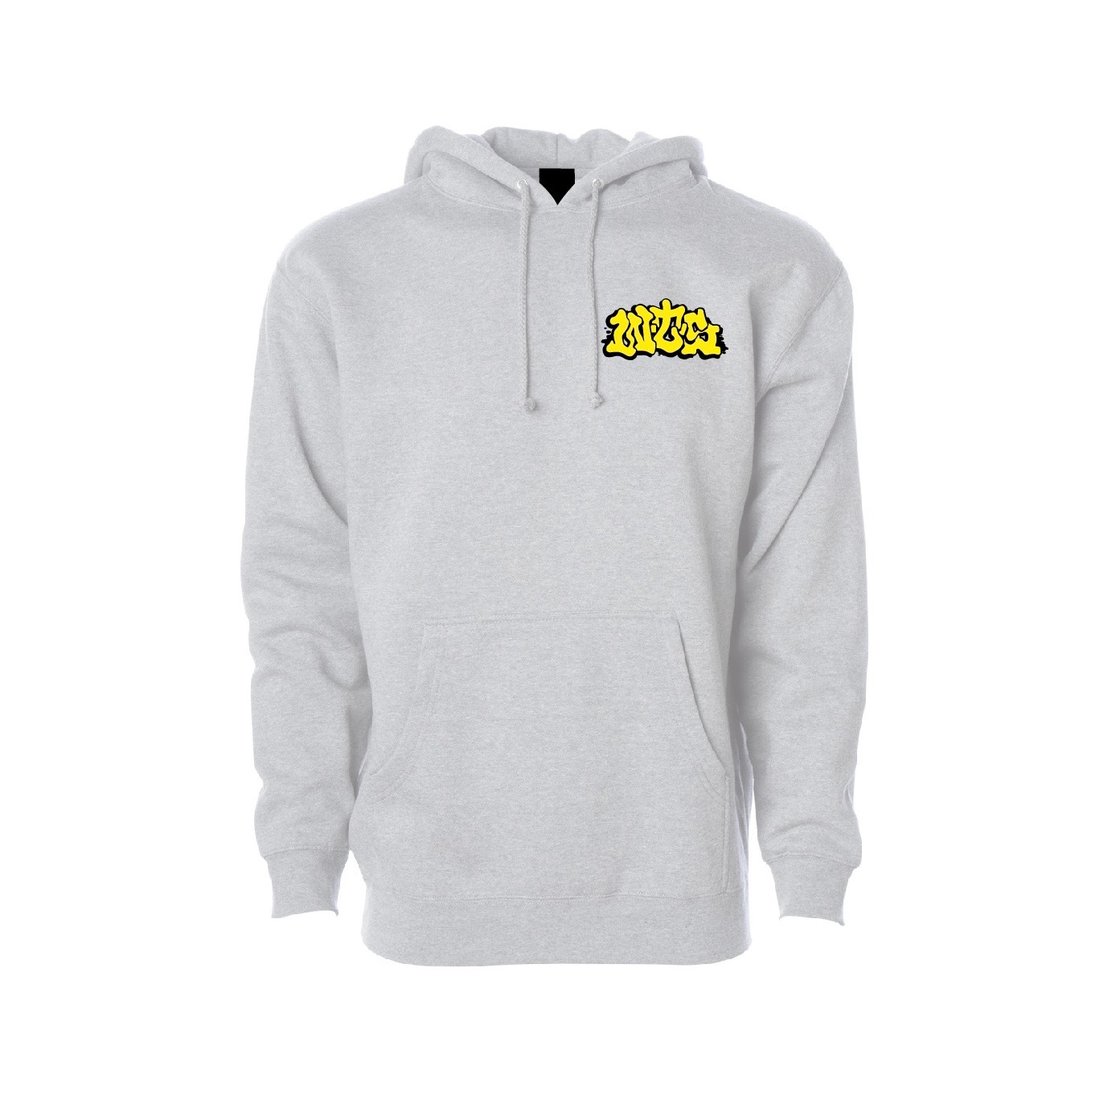 Image of WRITING TO SURVIVE (BLK/GOLD/GREY HOODIE)